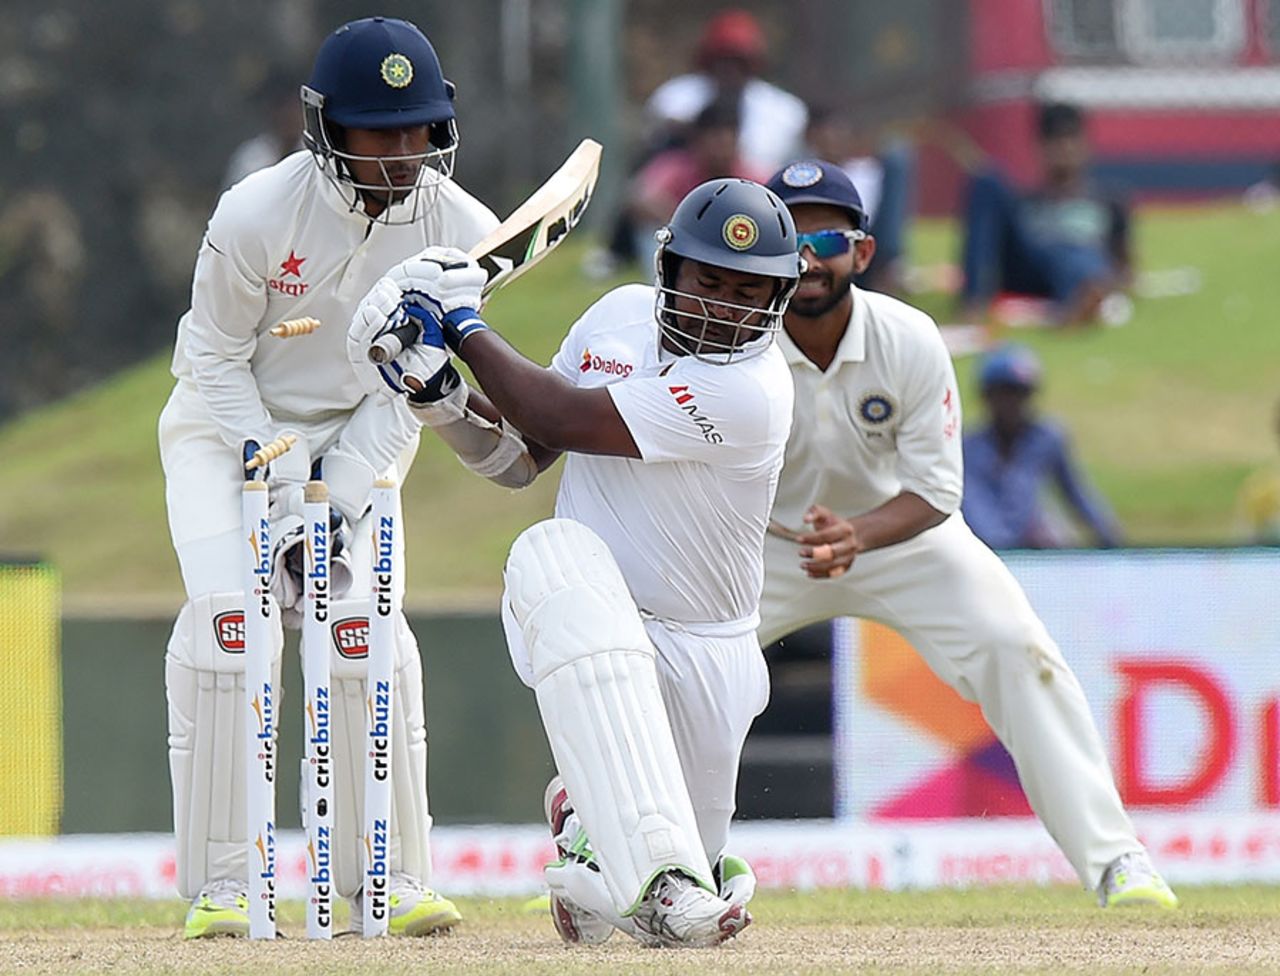 Rangana Herath is bowled by R Ashwin, Sri Lanka v India, 1st Test, Galle, 1st day, August 12, 2015